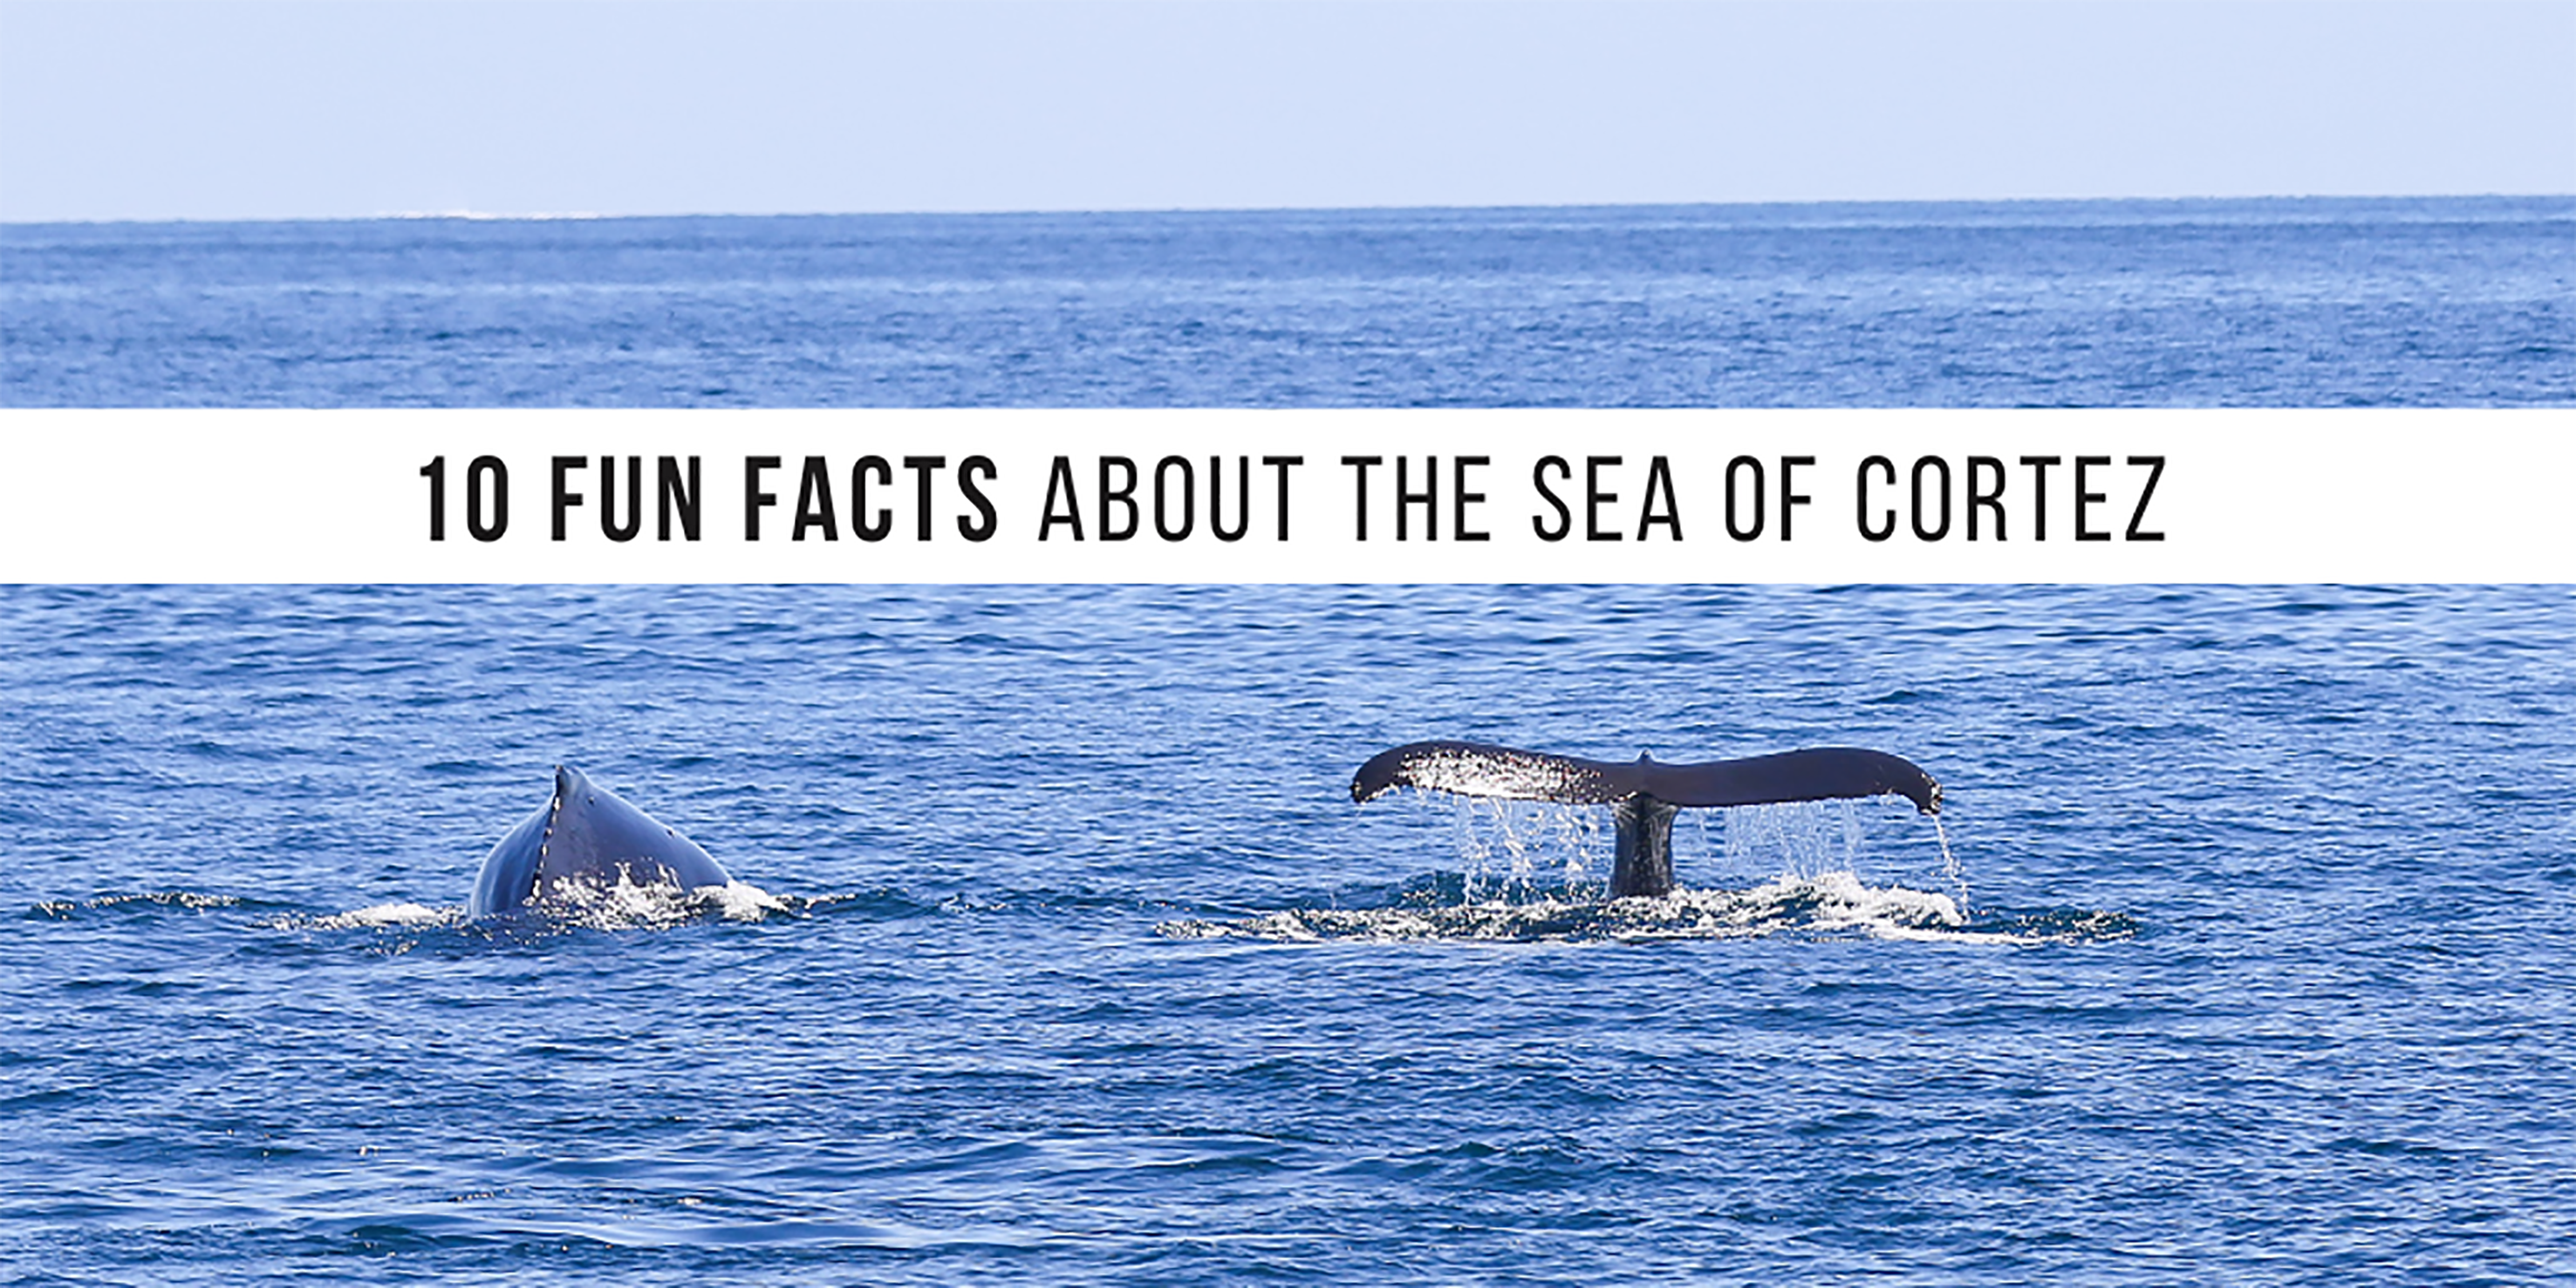 10 Fun Facts About the Sea of Cortez